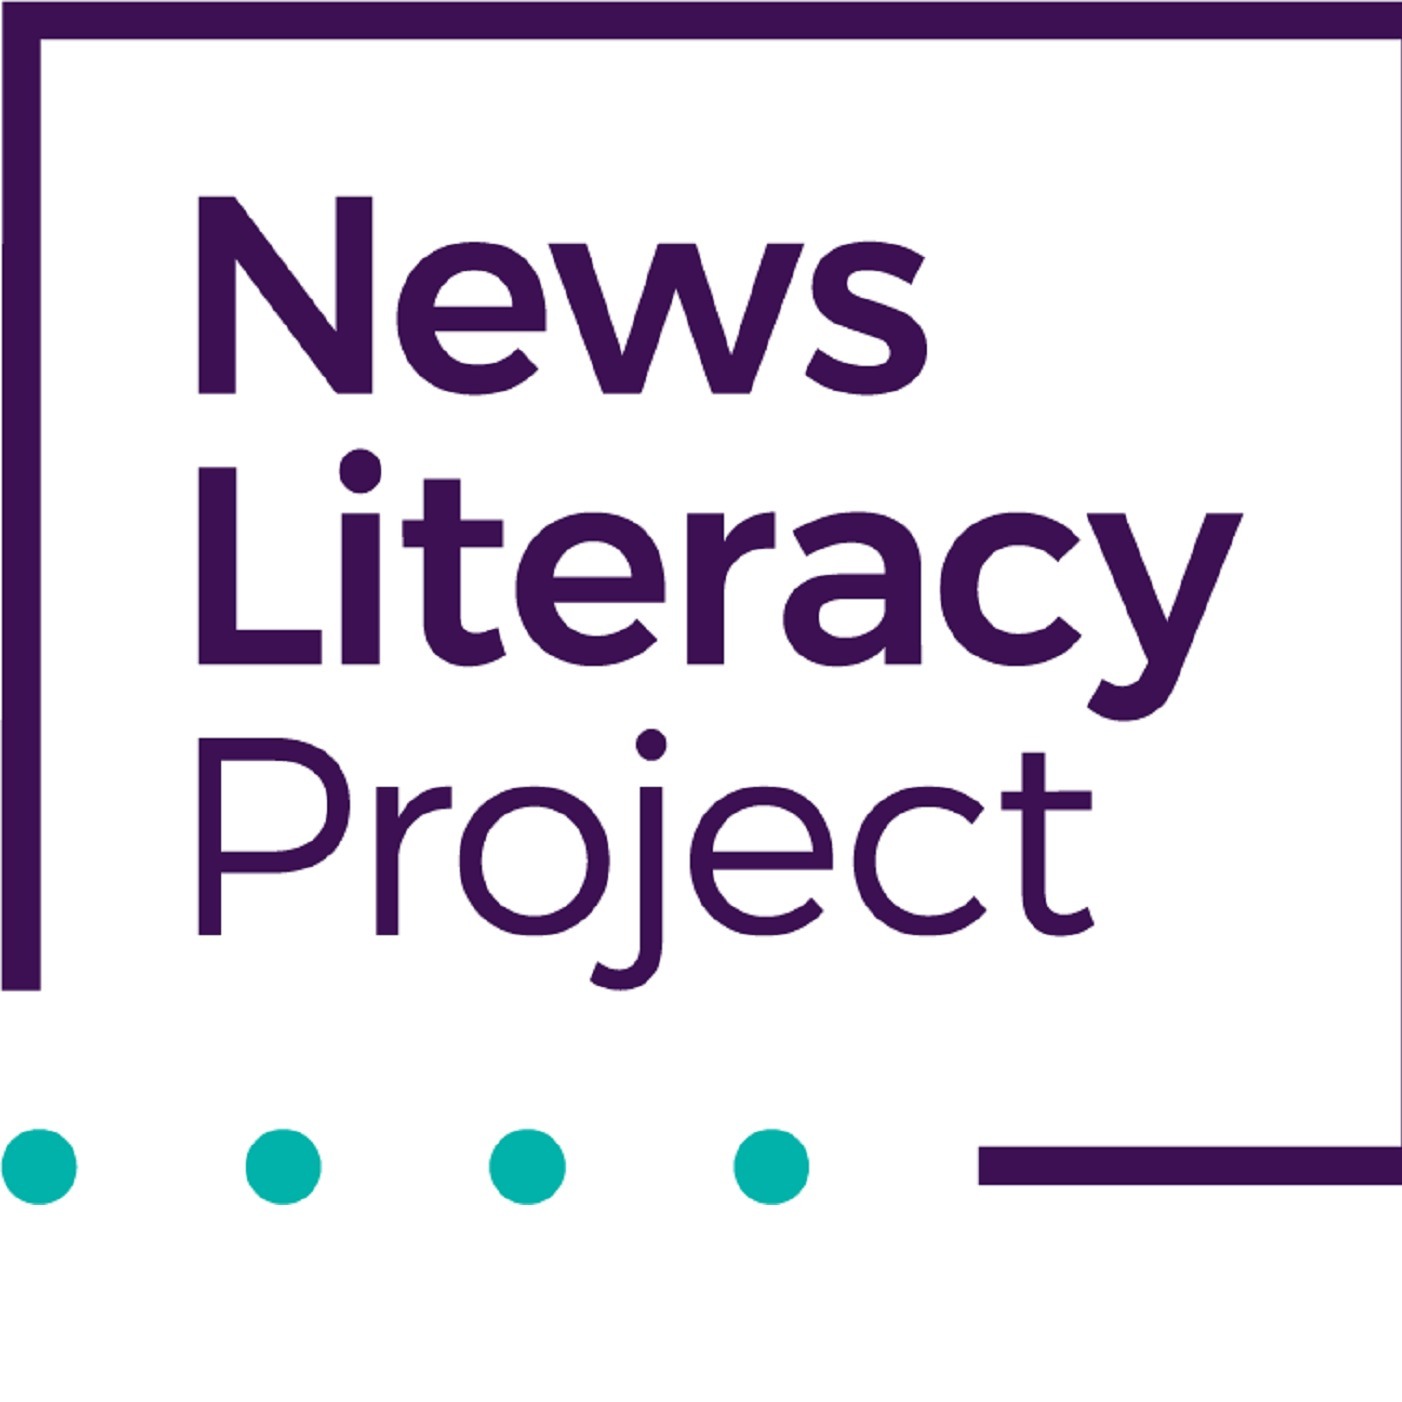 Becoming a Better News Consumer with Darragh Worland of the News Literacy Project